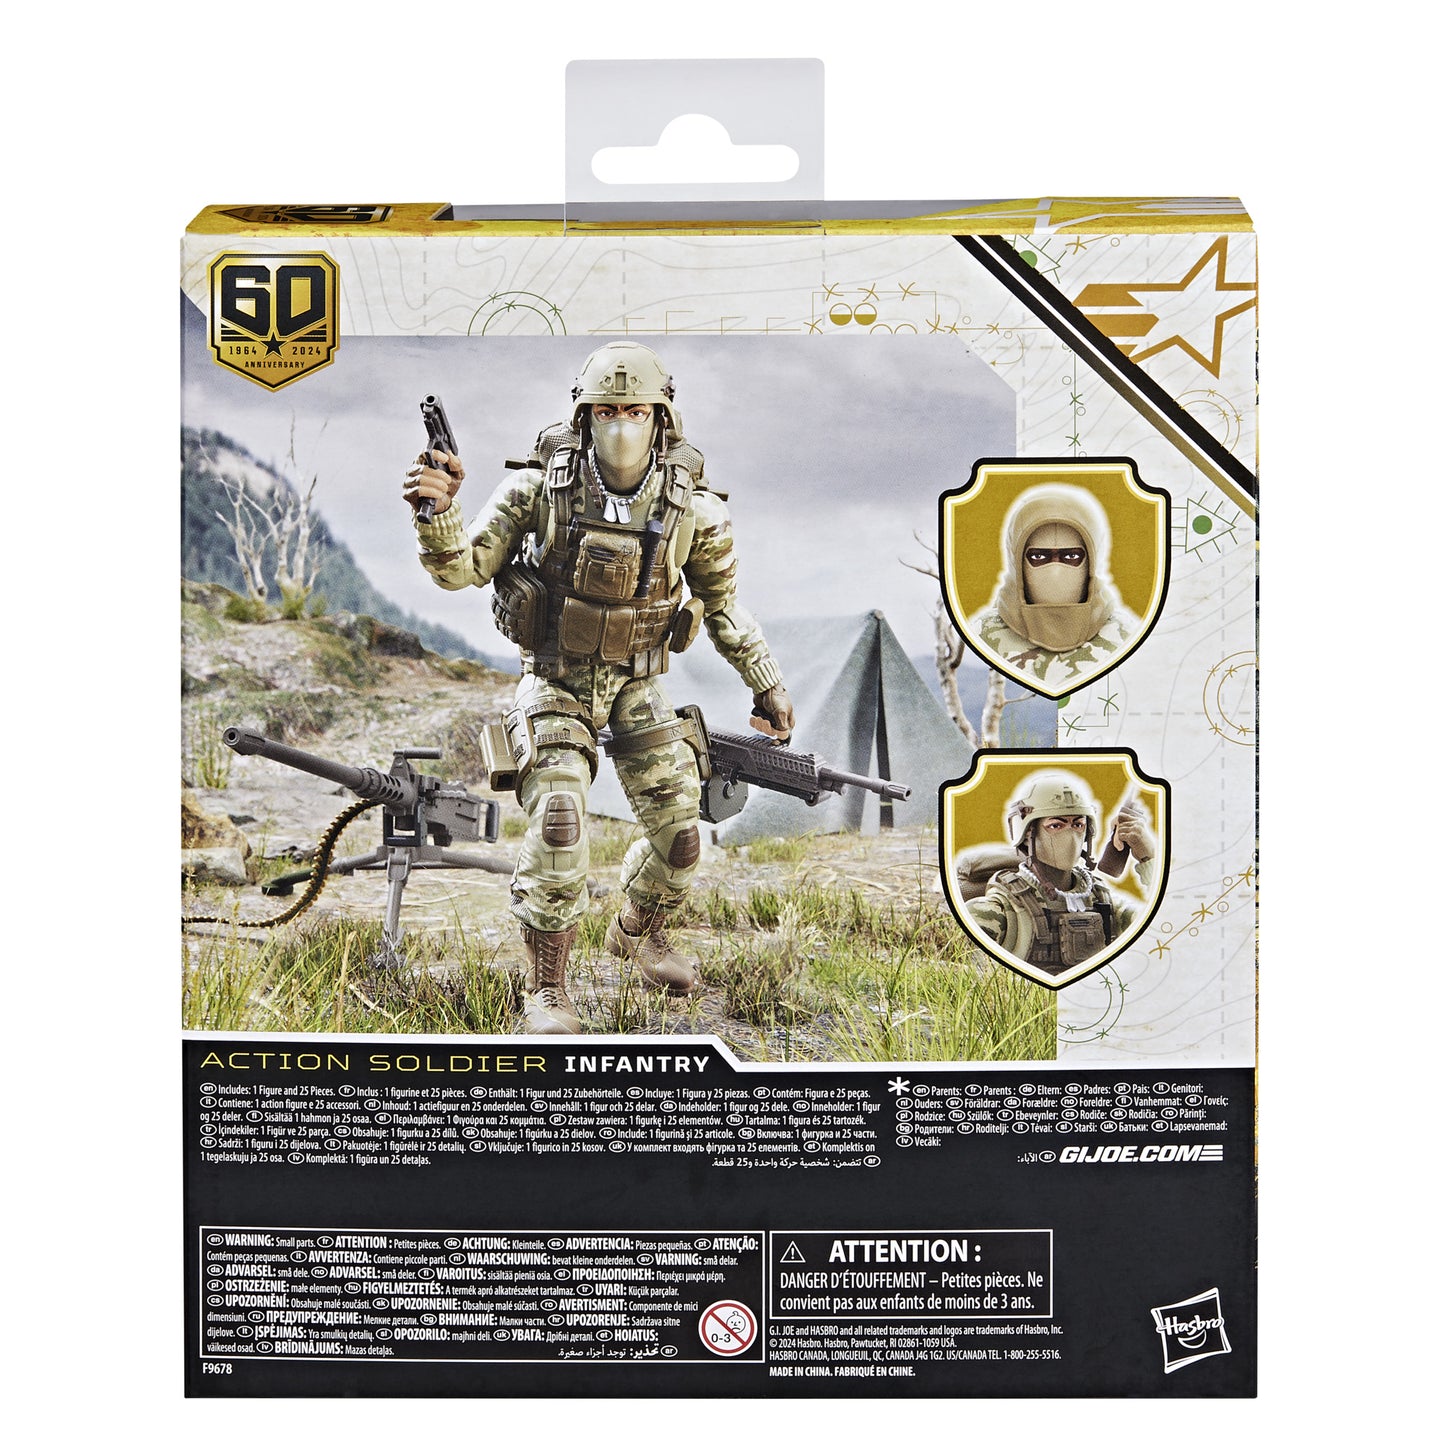 (PRE-ORDER) GI Joe Classified Series - 60th Anniversary Infantry Soldier - 6 inch Action Figure